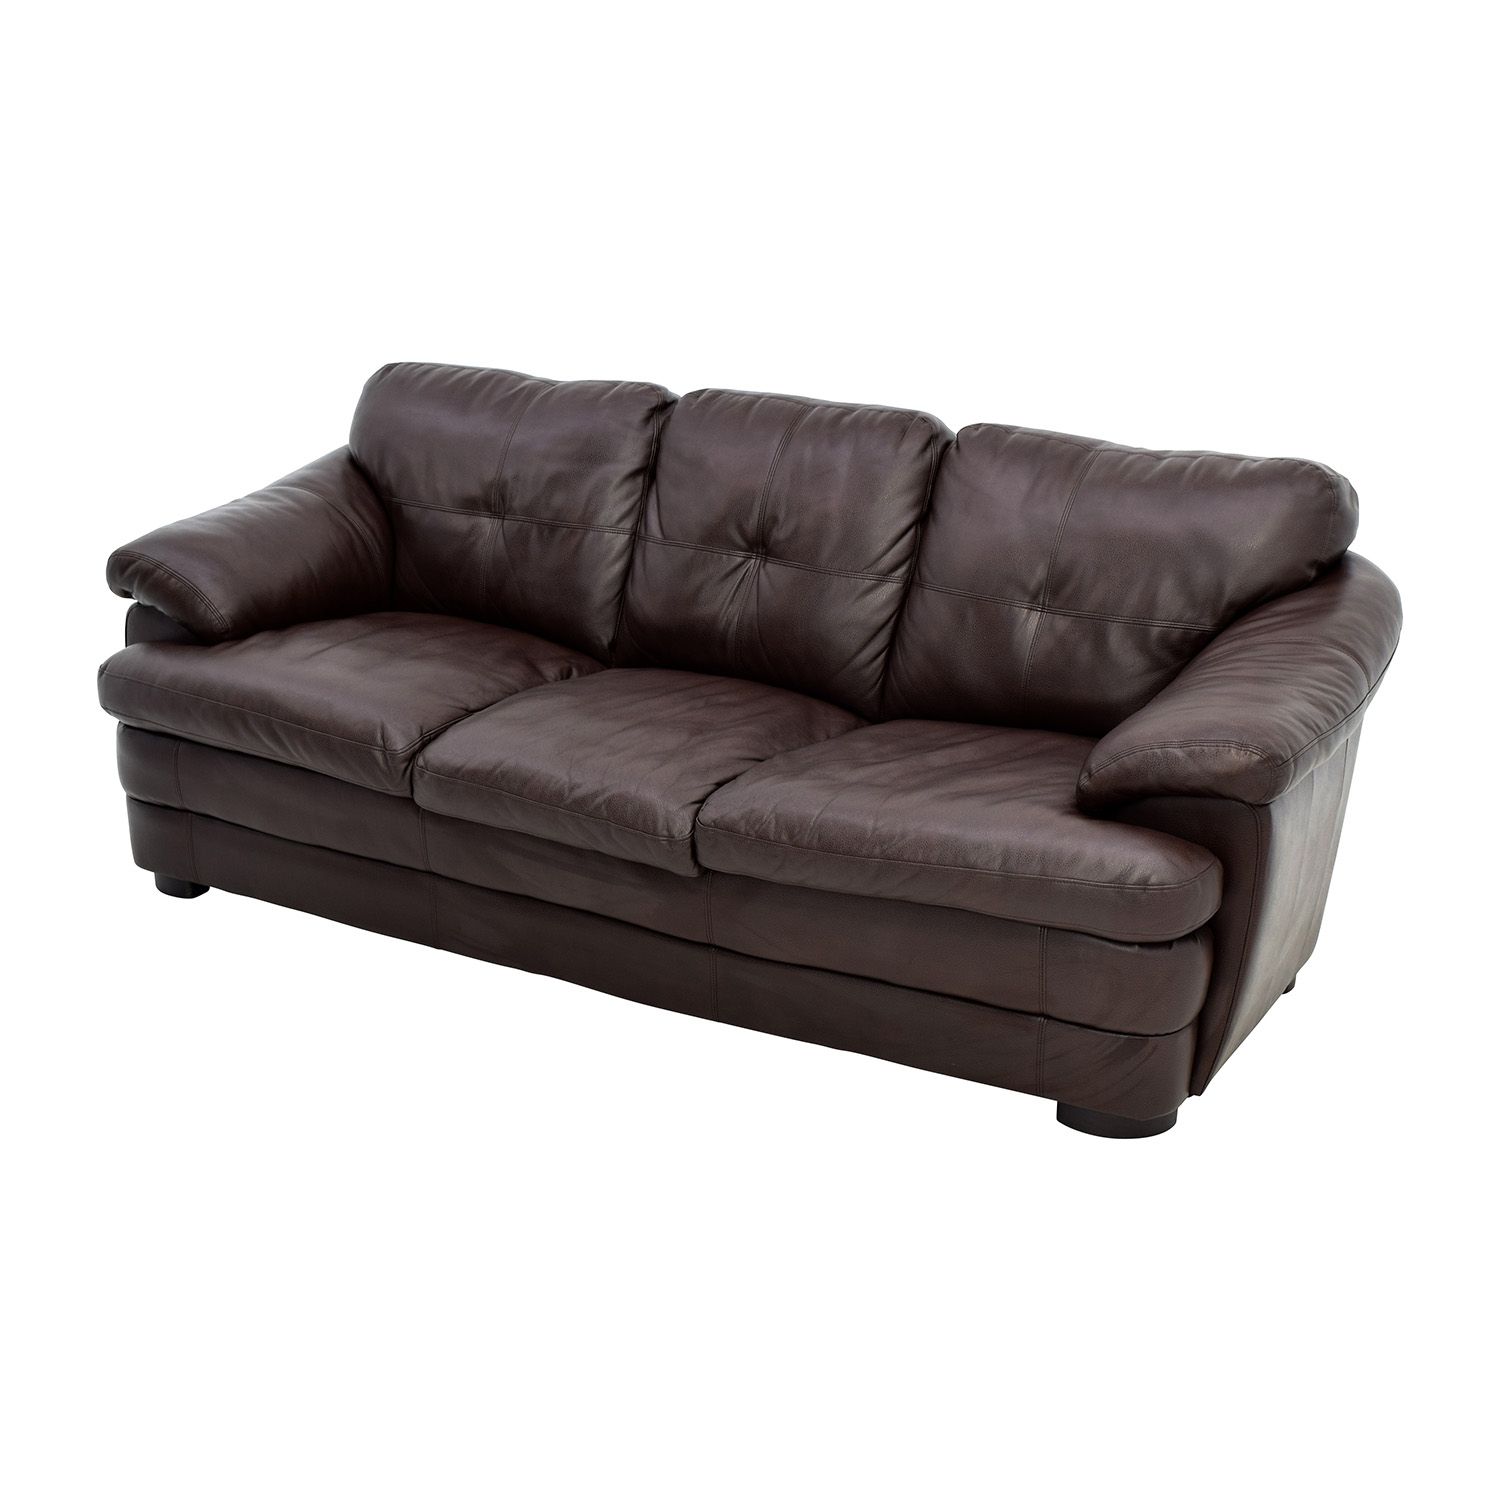 40% Off – Brown Faux Leather Couch / Sofas For Faux Leather Sofas In Chocolate Brown (View 17 of 20)